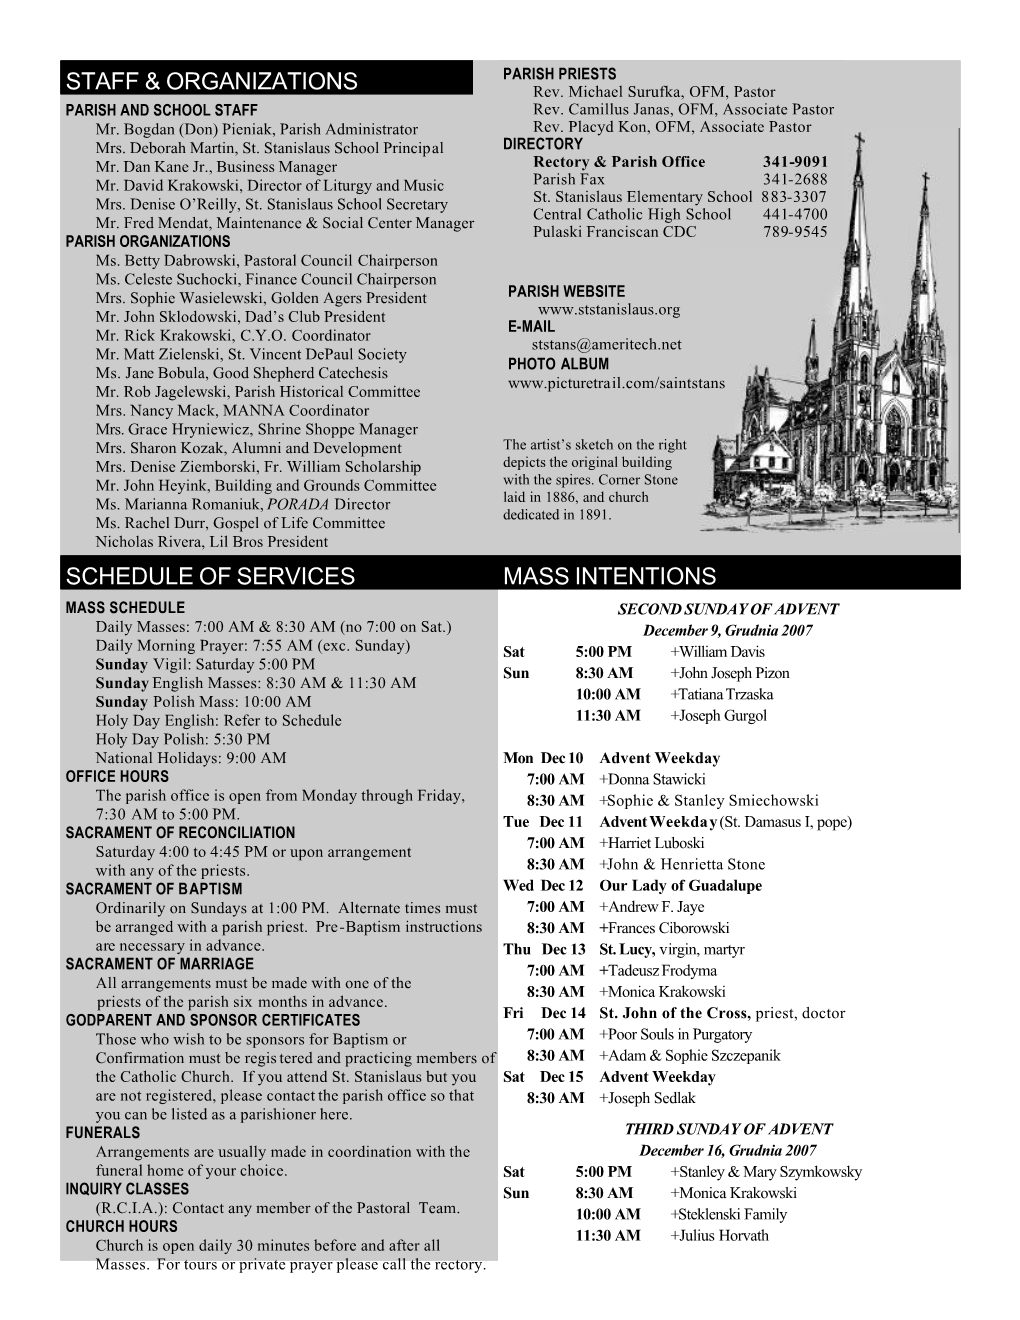 Schedule of Services Mass Intentions Staff